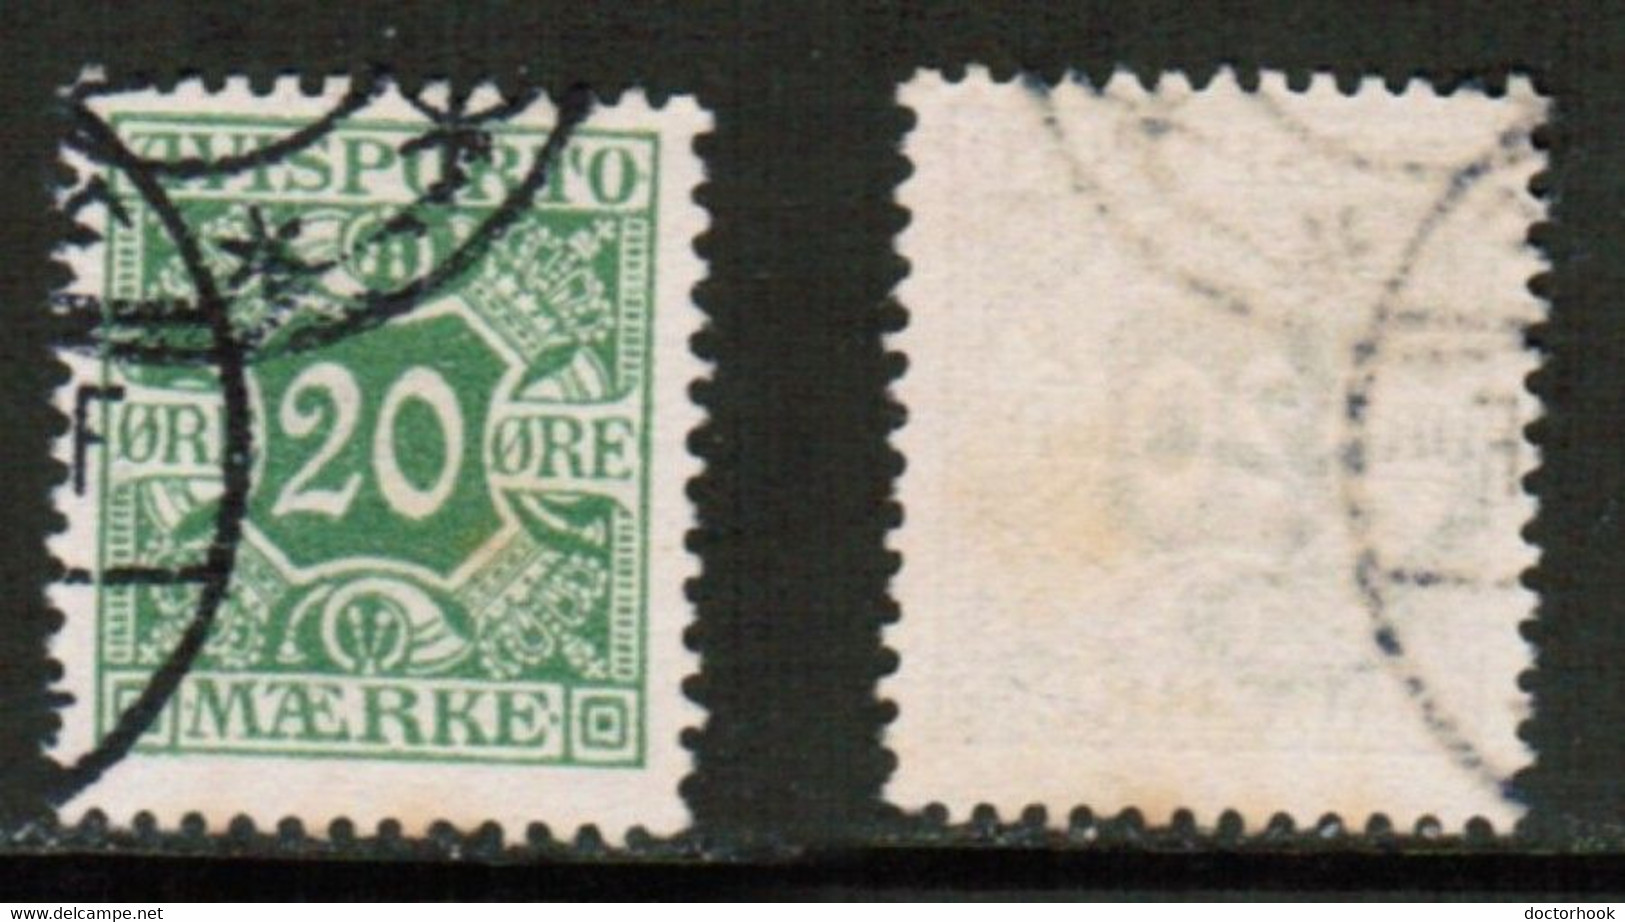 DENMARK   Scott # P 5 USED (CONDITION AS PER SCAN) (Stamp Scan # 864-22) - Used Stamps